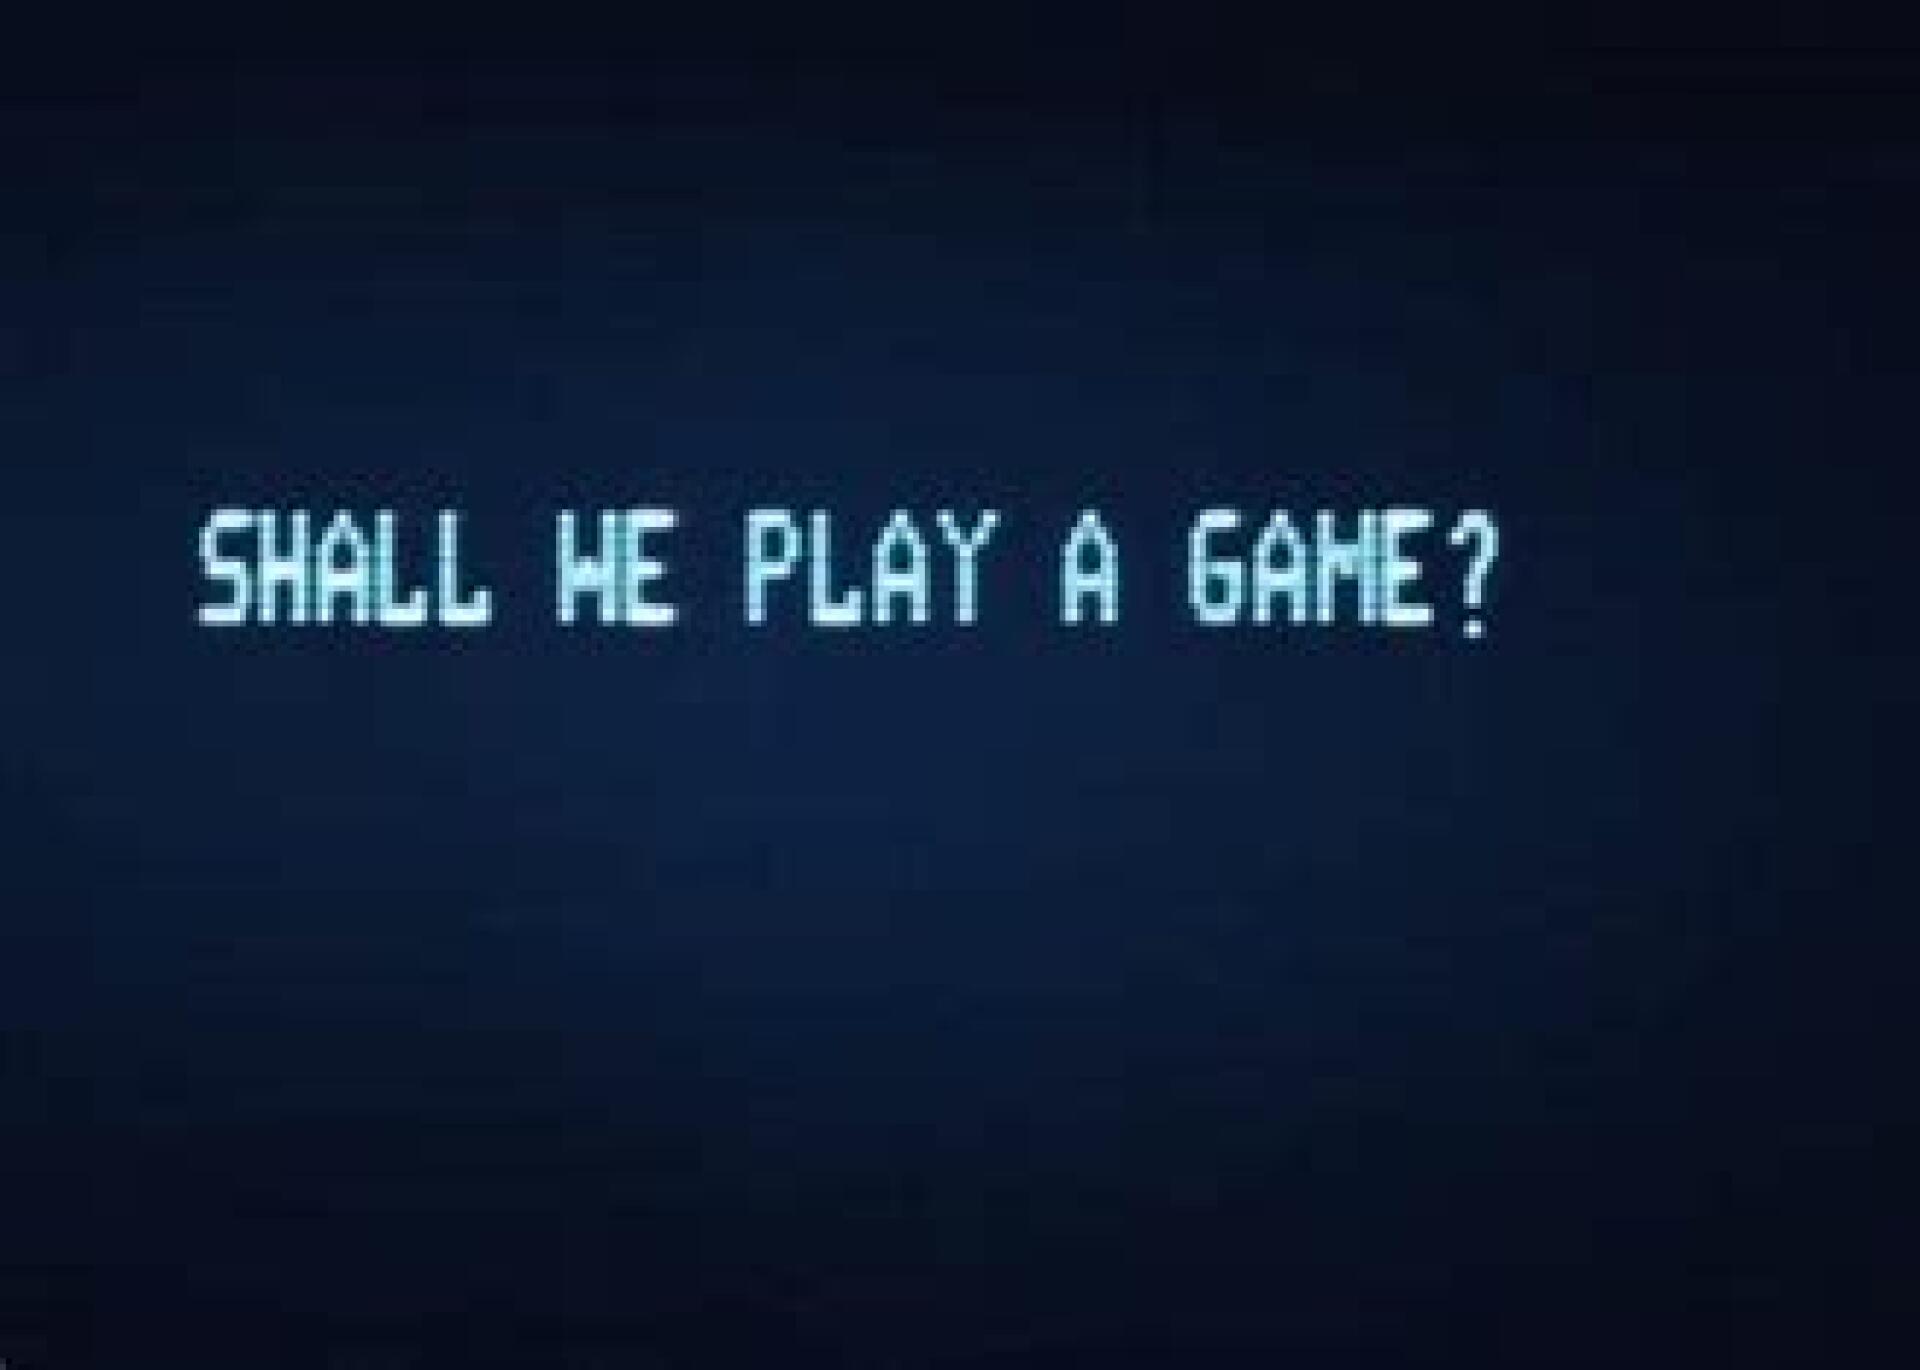 Shall we play a game?